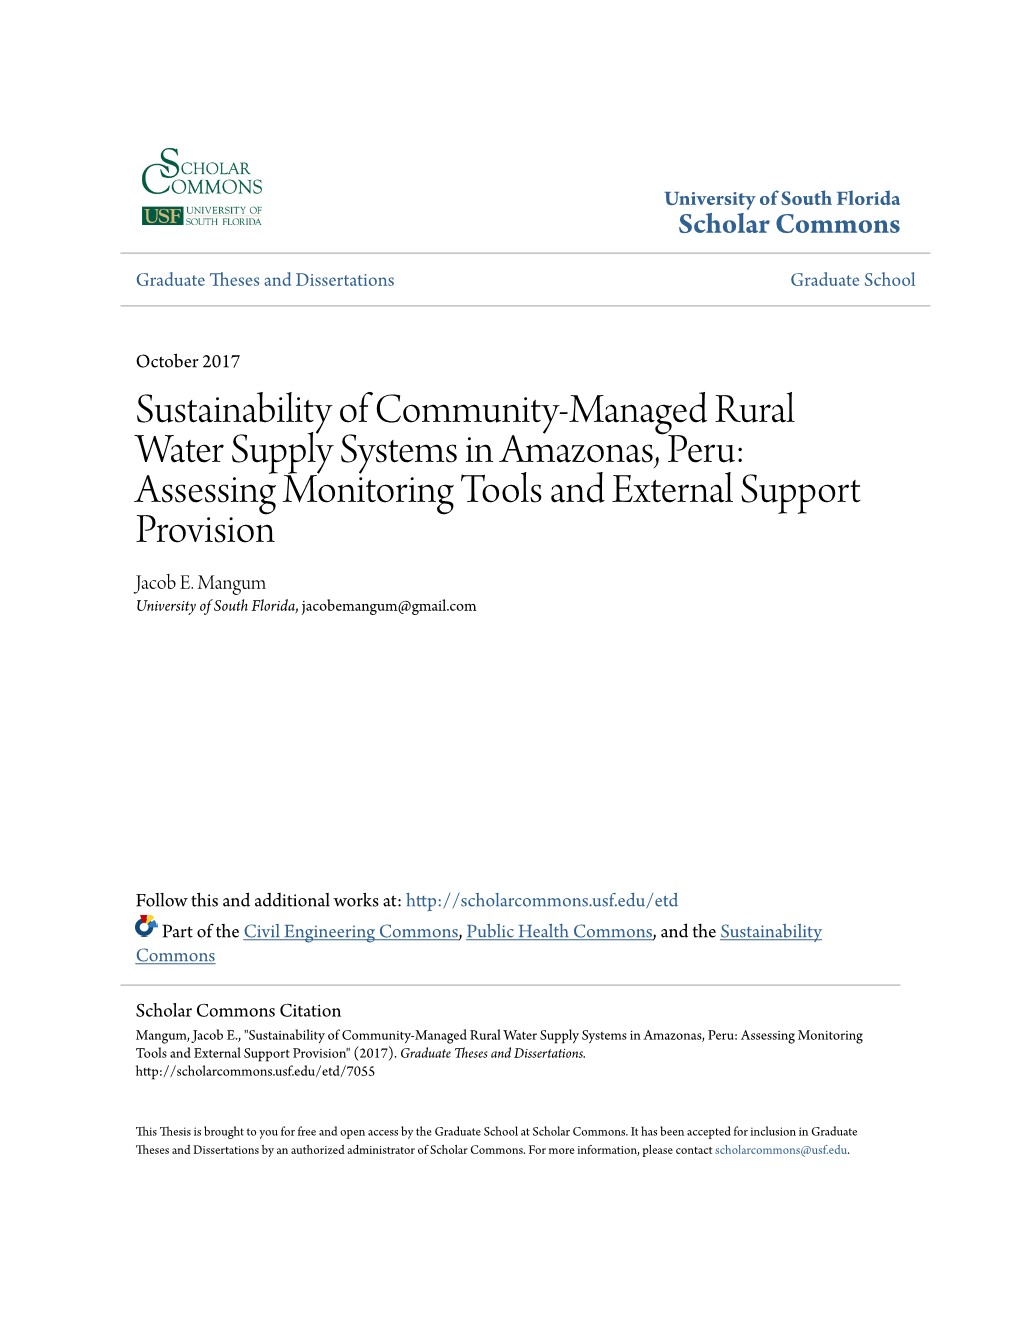 Sustainability of Community-Managed Rural Water Supply Systems in Amazonas, Peru: Assessing Monitoring Tools and External Support Provision Jacob E